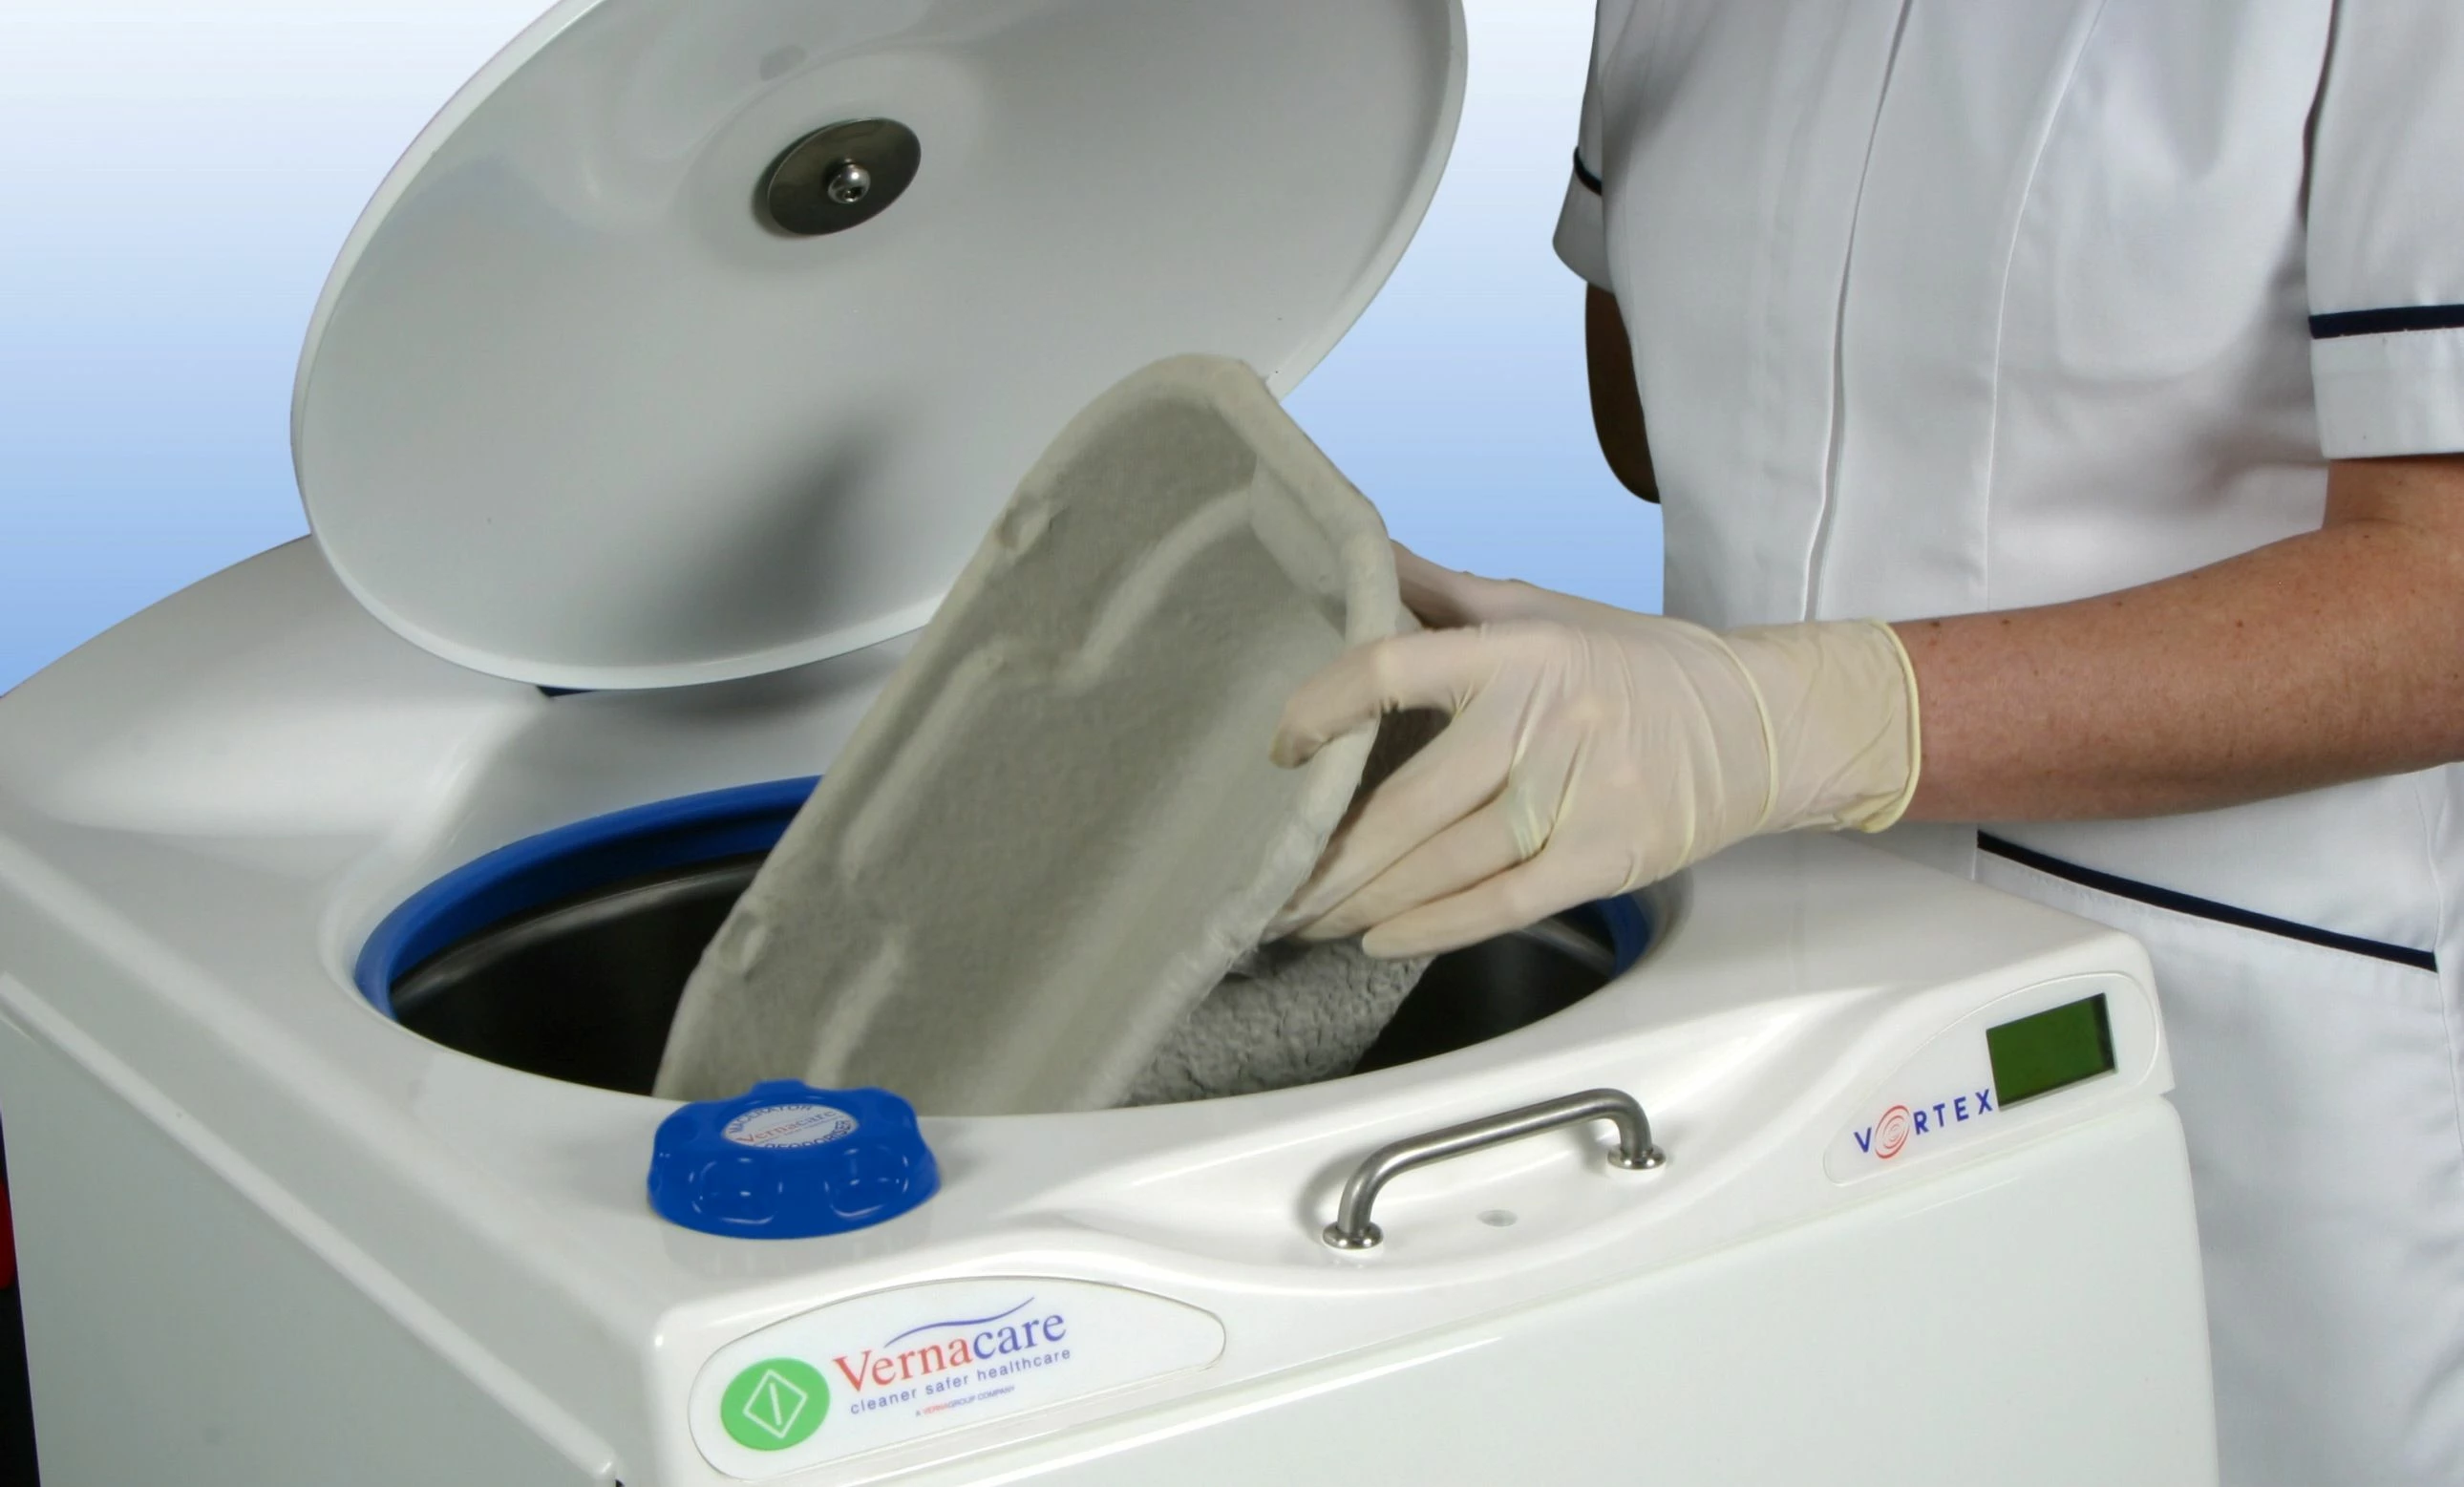 Vernacare is shortlisted for major industry healthcare award for global sales of its hygienic system